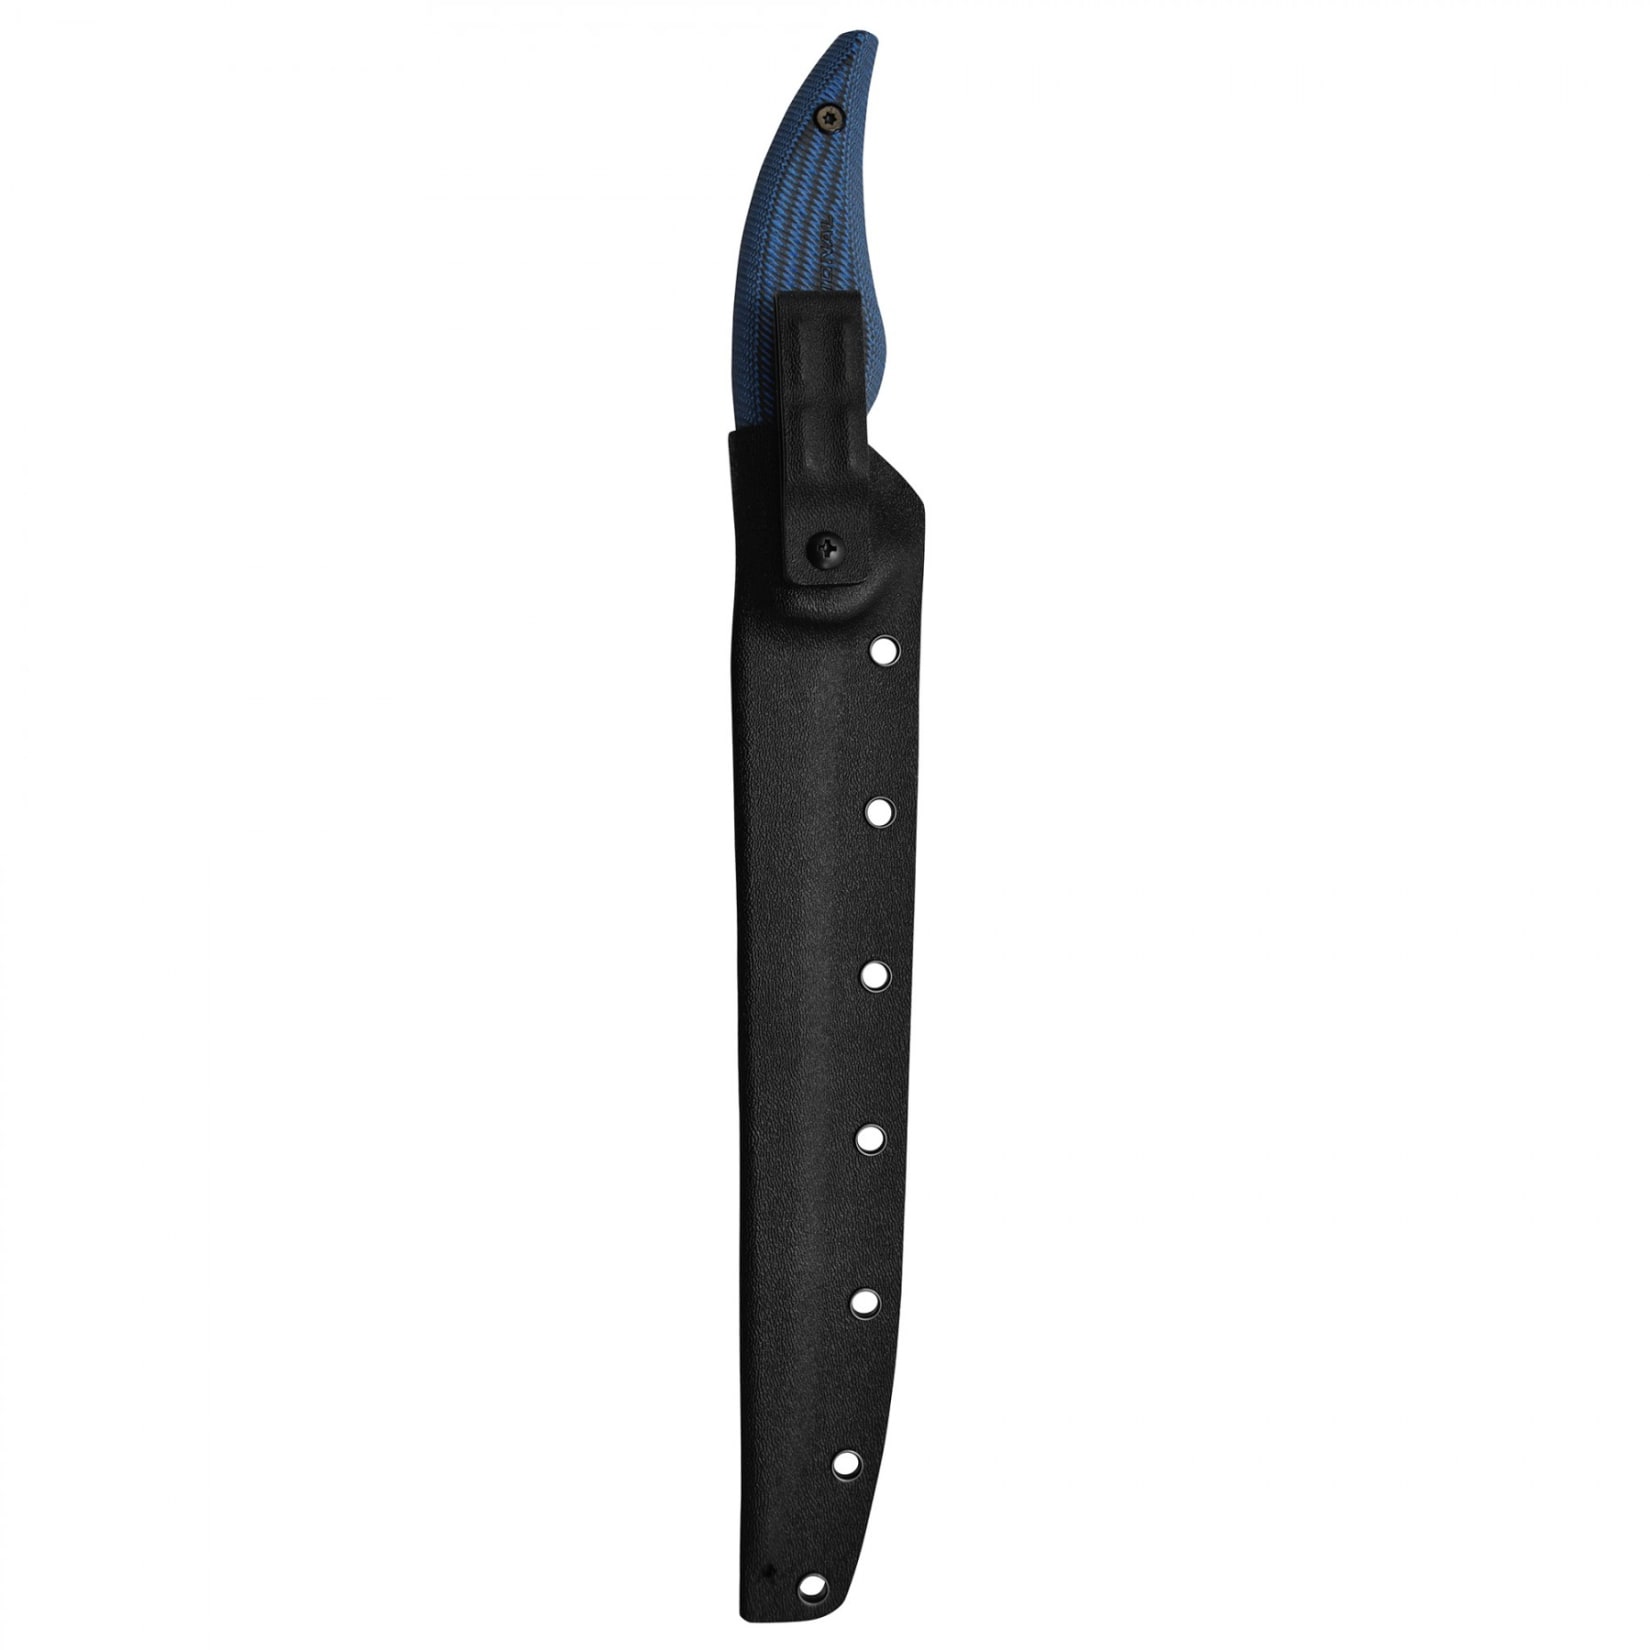 https://image.fisheriessupply.com/c_lpad,dpr_3.0,w_550,h_550,d_imageComingSoon-tiff/f_auto,q_auto/v1/static-images/cuda-9-in-fillet-knifes-in-sheath